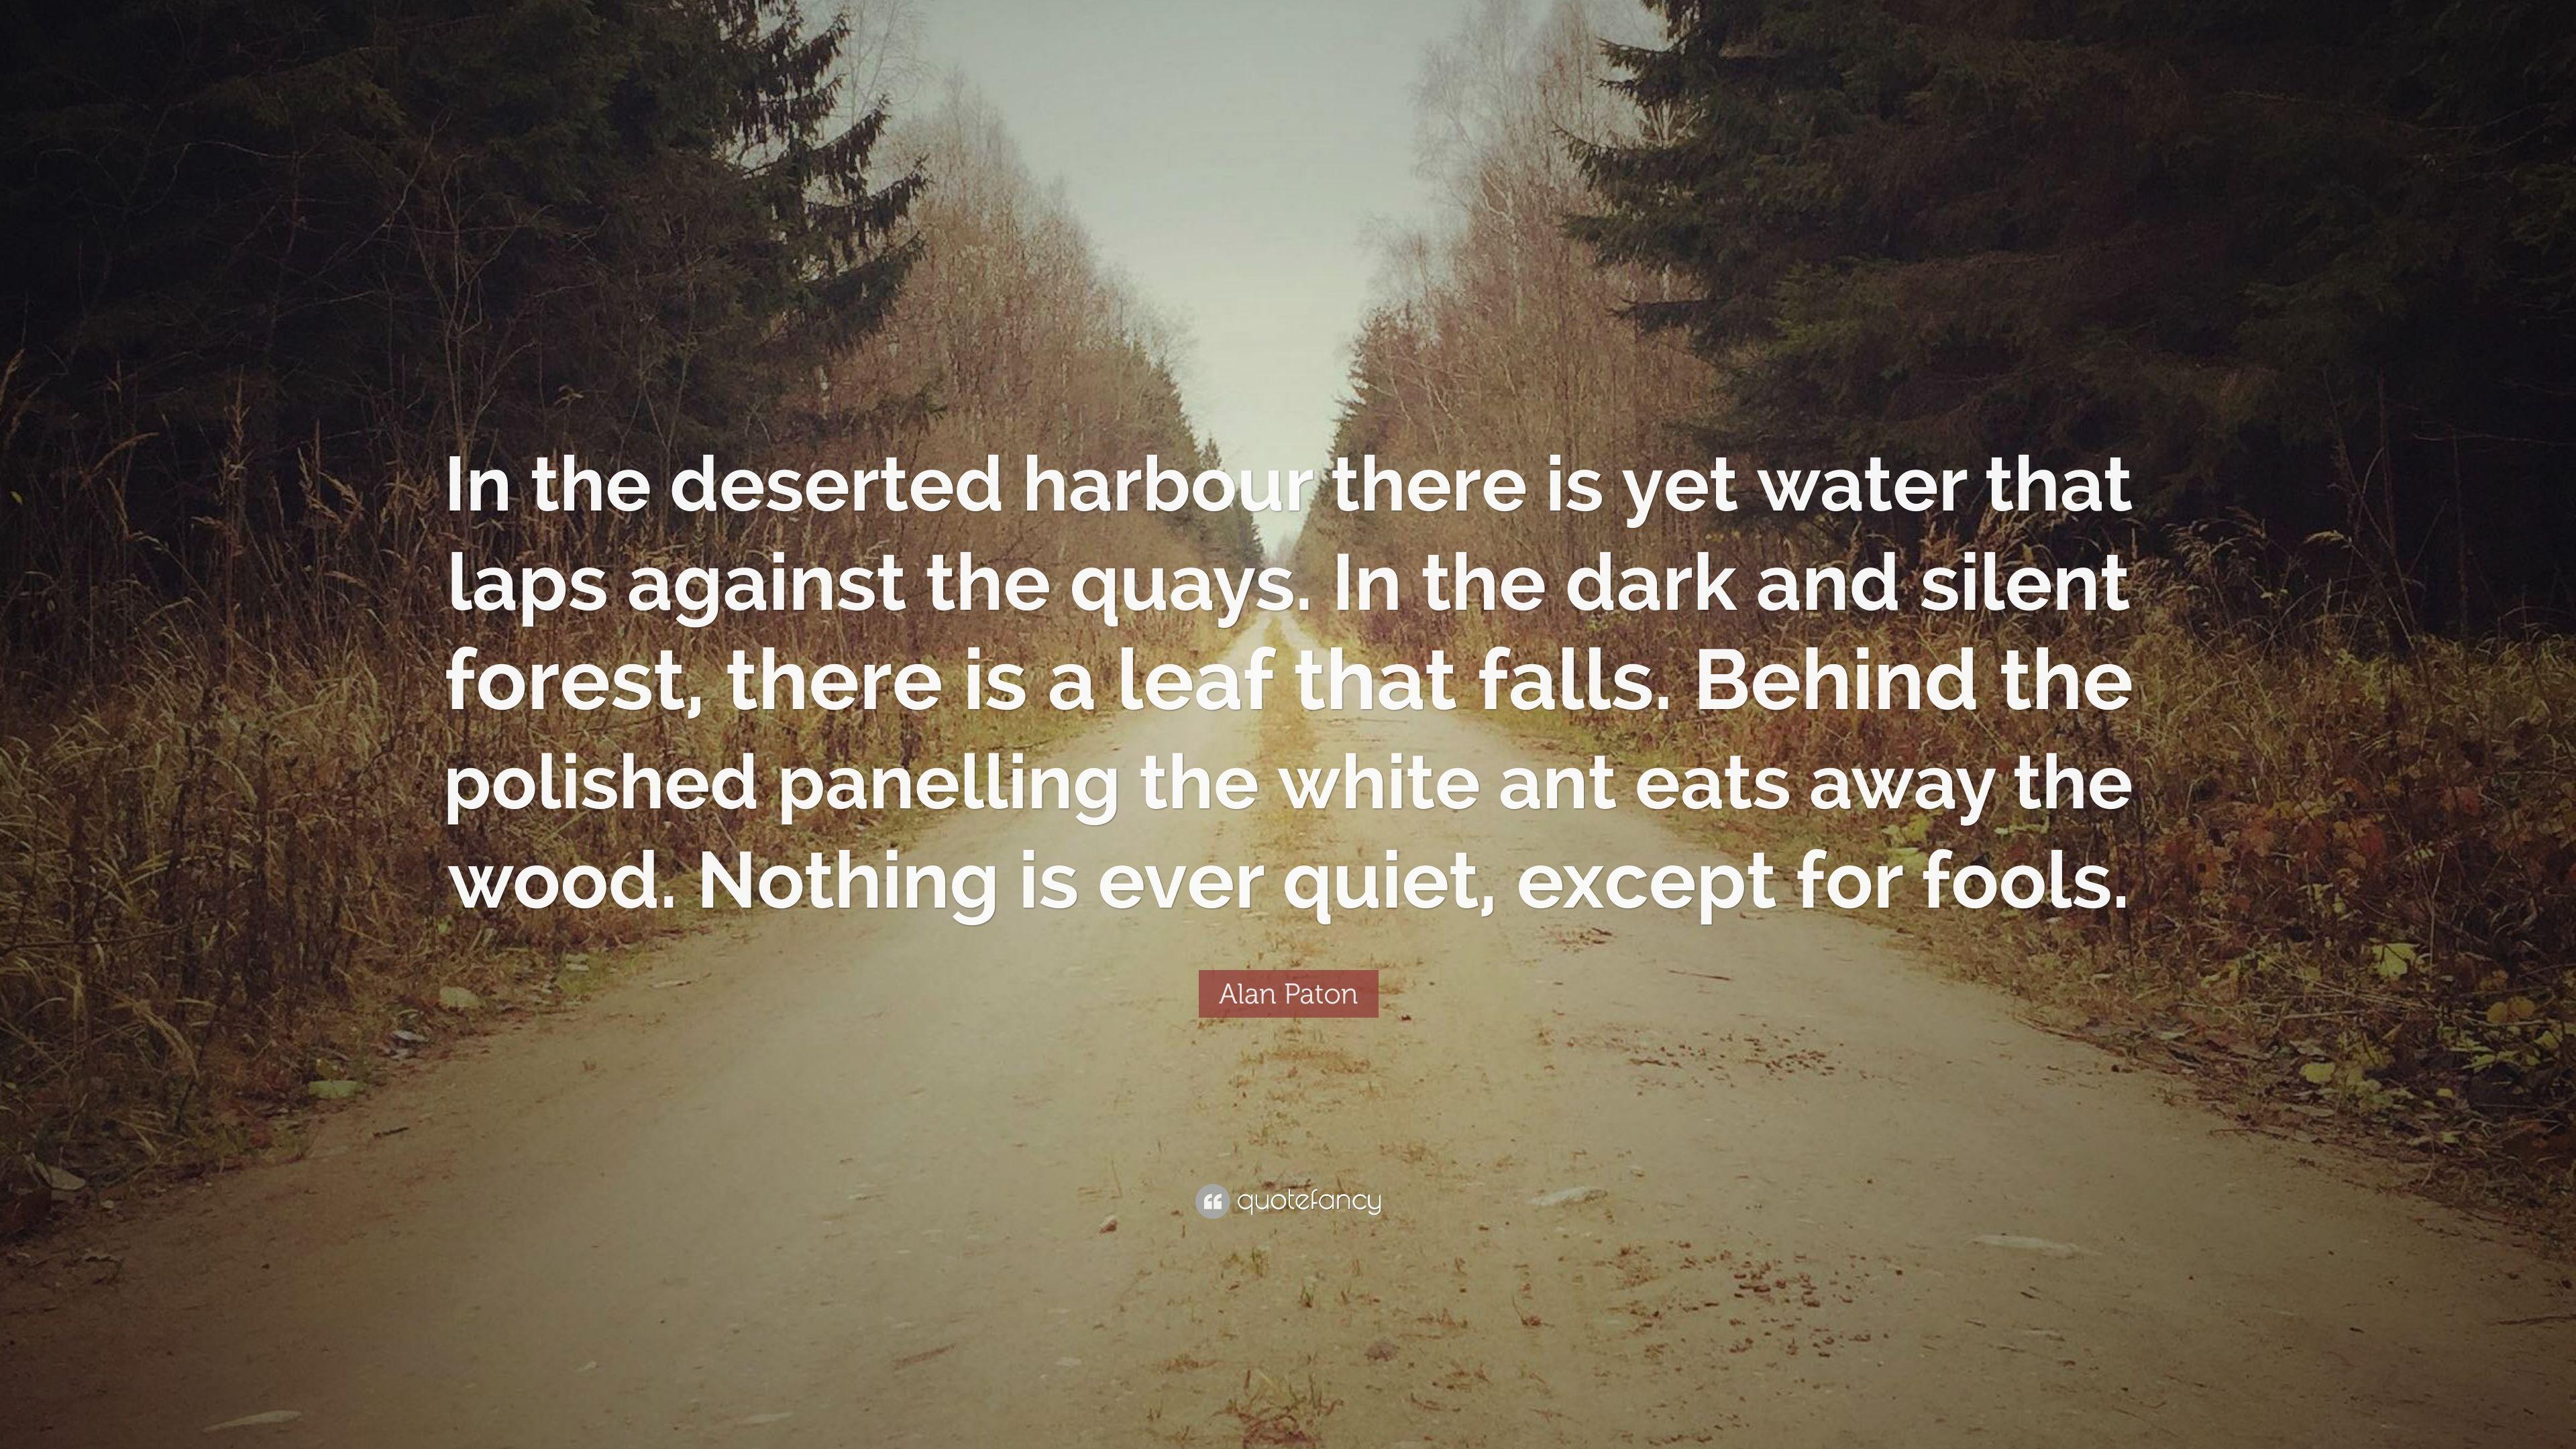 Alan Paton Quote: “In the deserted harbour there is yet water that